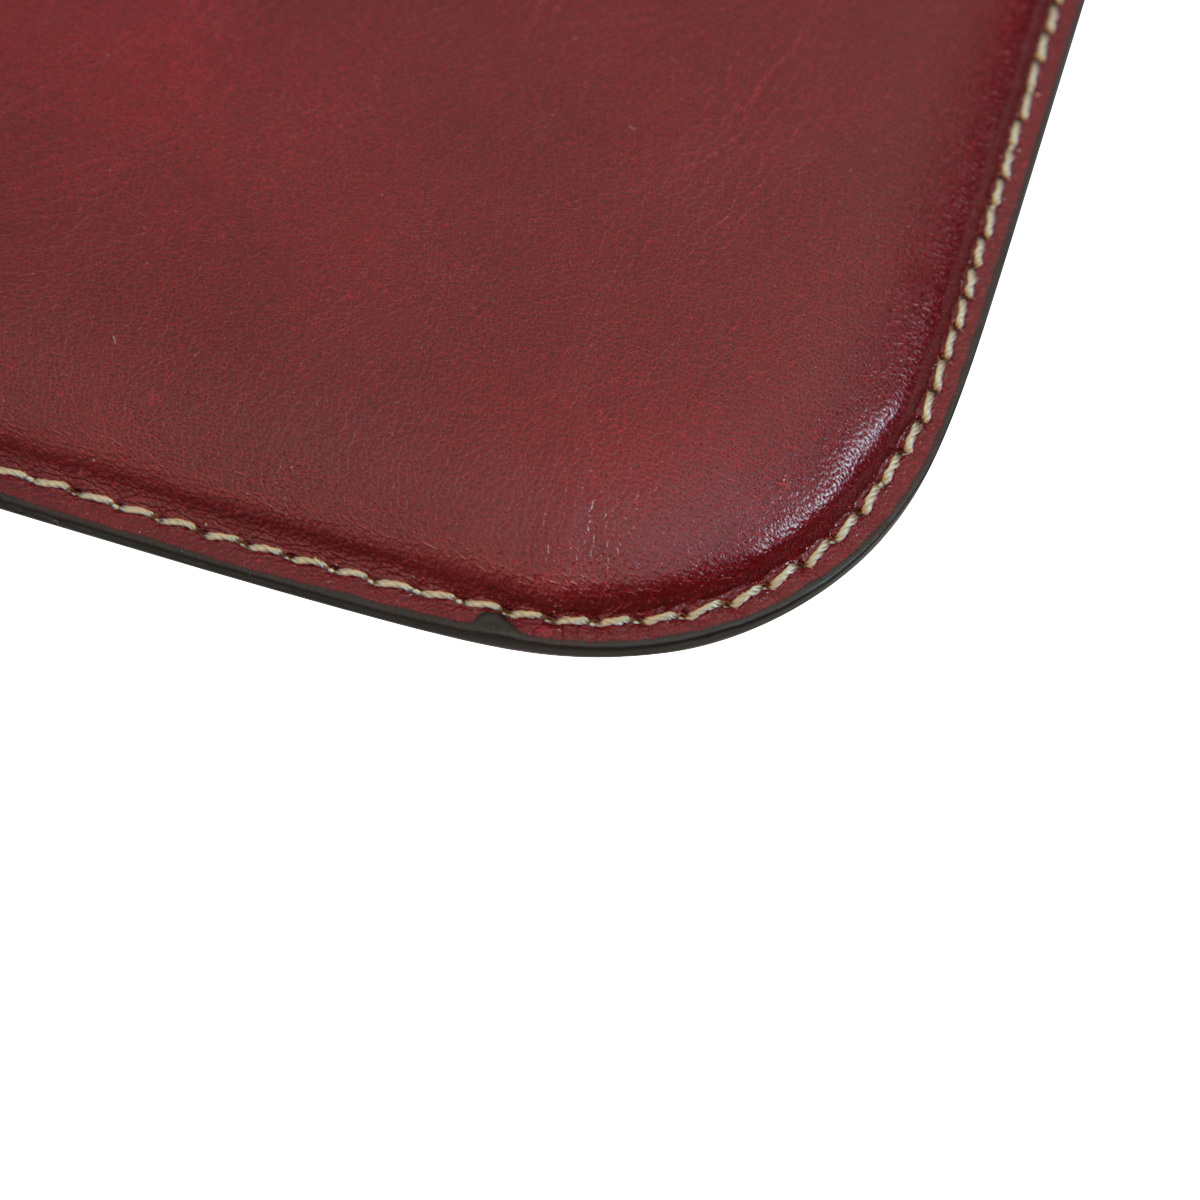 Leather desk pad - red|760089RO|Old Angler Firenze